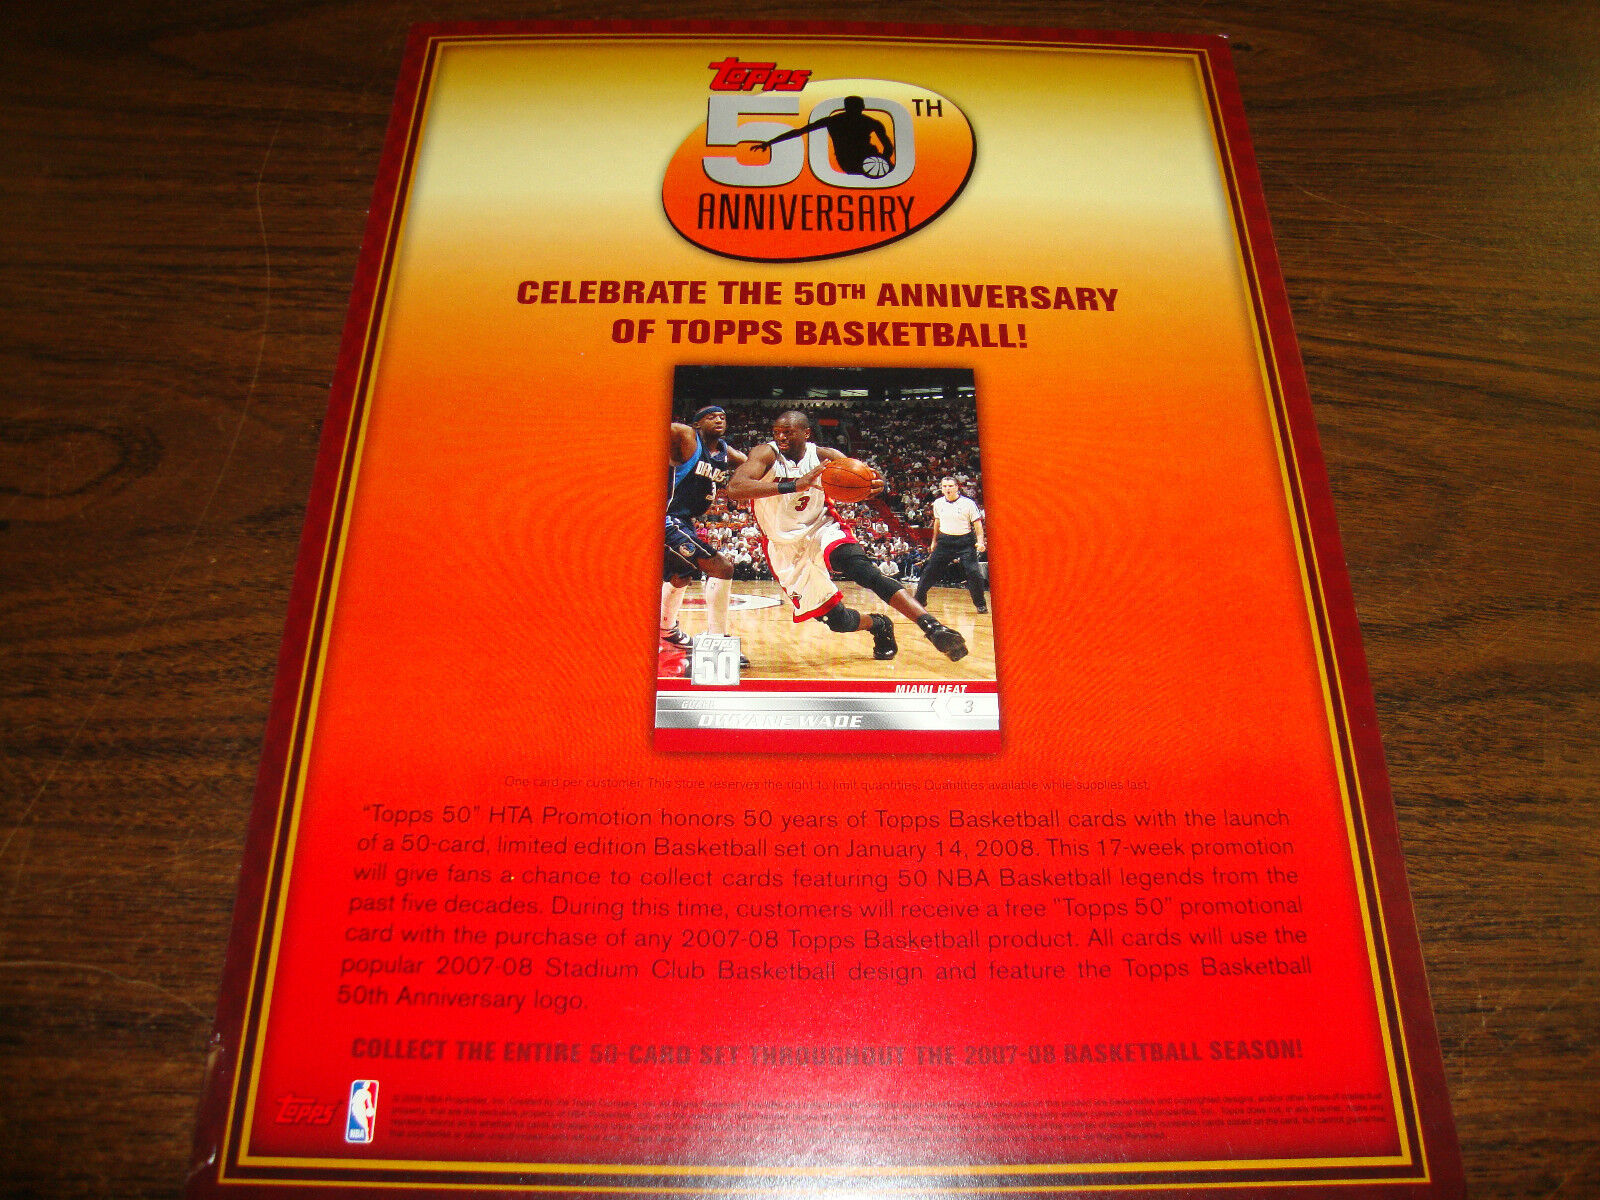 2007-08 Topps Basketball---50th Anniversary Promotion---Stand-Up Counter Display